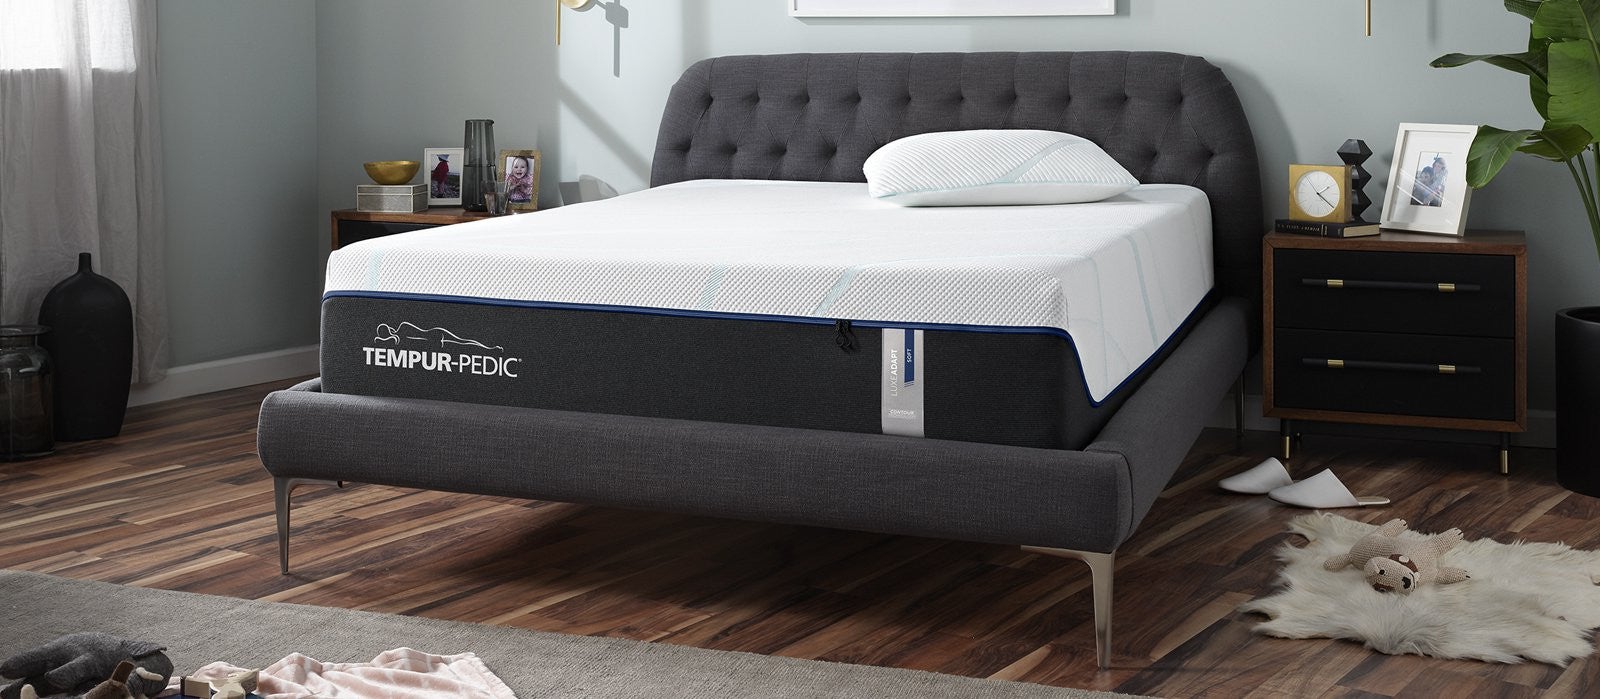 used firm tempur pedic mattress for sale